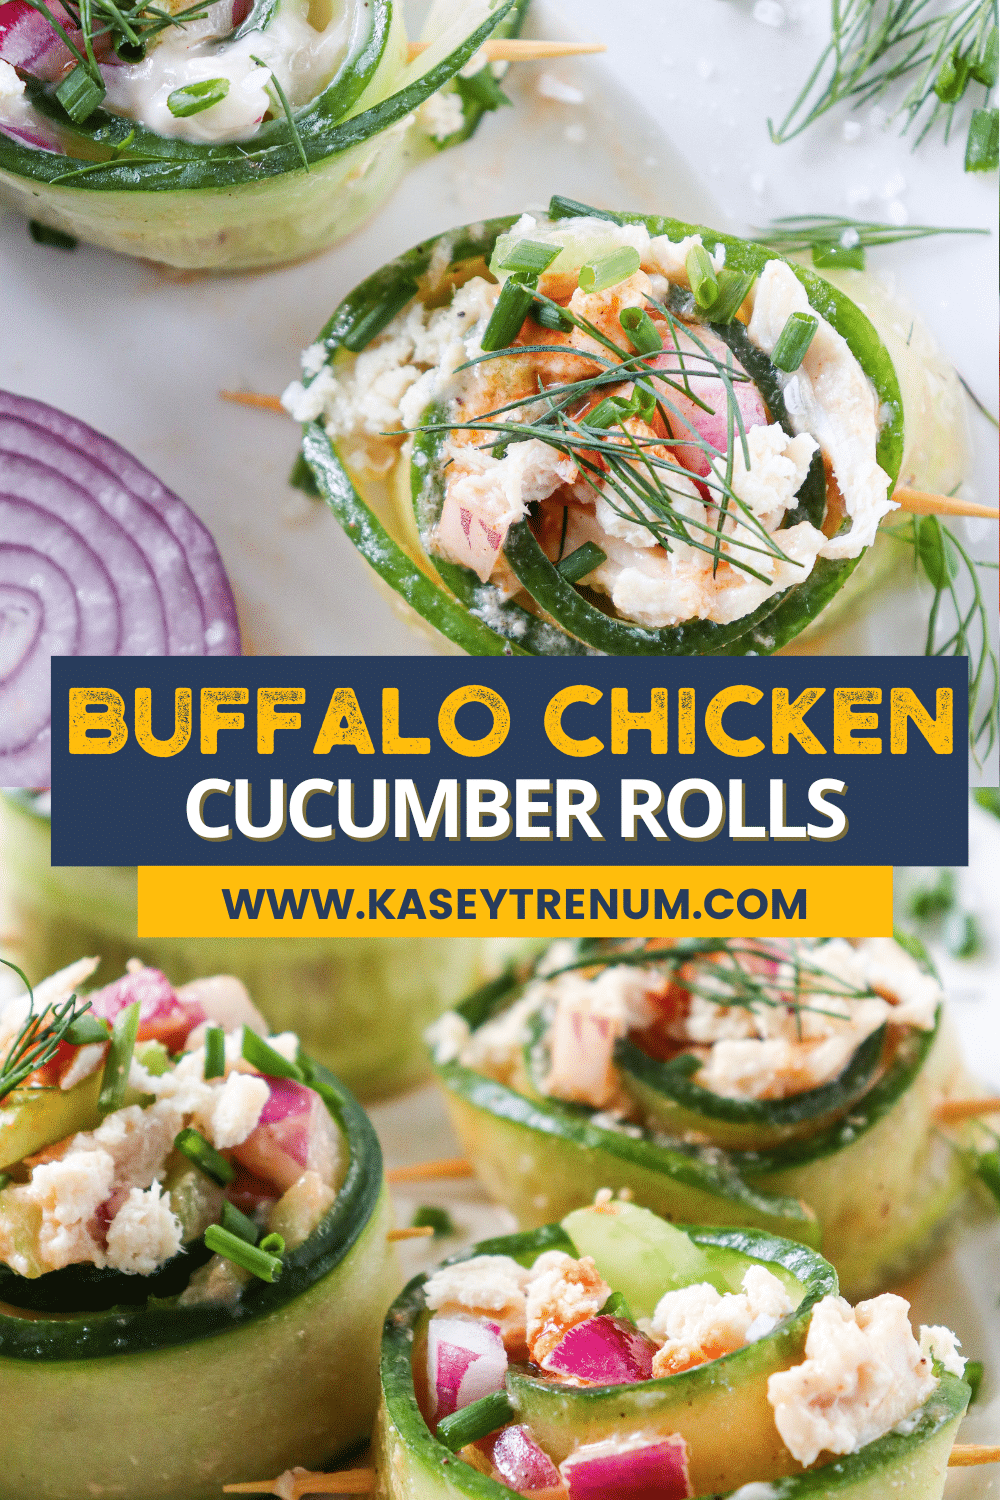 Buffalo Chicken Cucumber Roll recipe collage featuring a refreshing and delicious low-carb appetizer with a blue banner and yellow and white lettering.